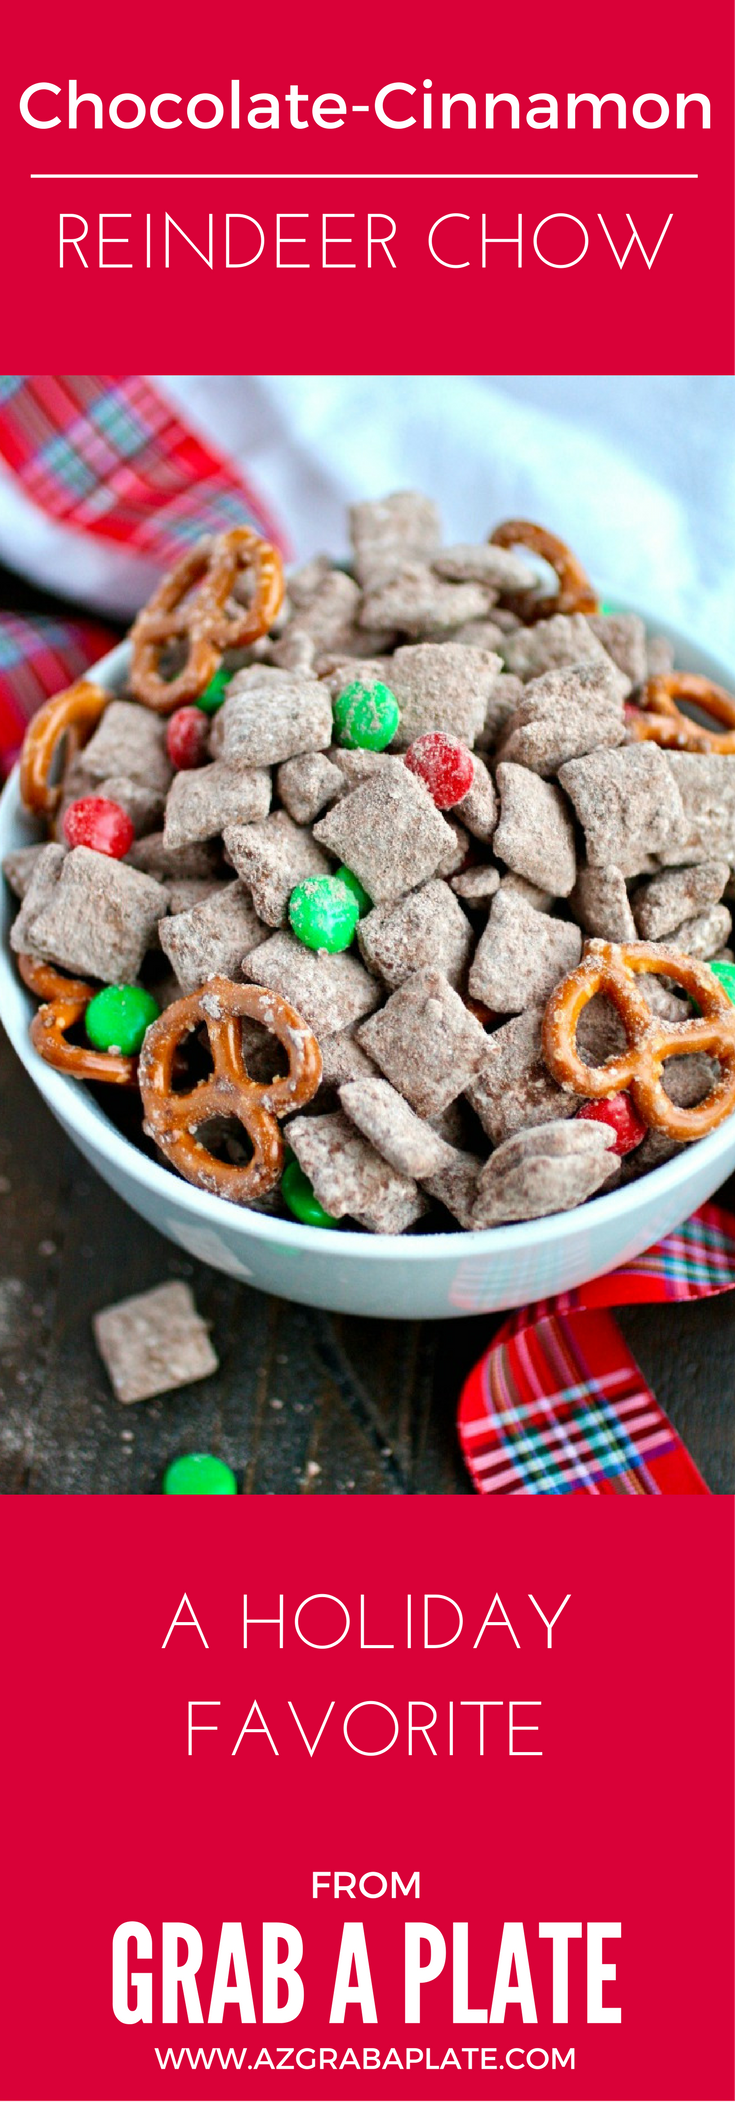 Holiday guests will love Chocolate-Cinnamon Reindeer Chow!